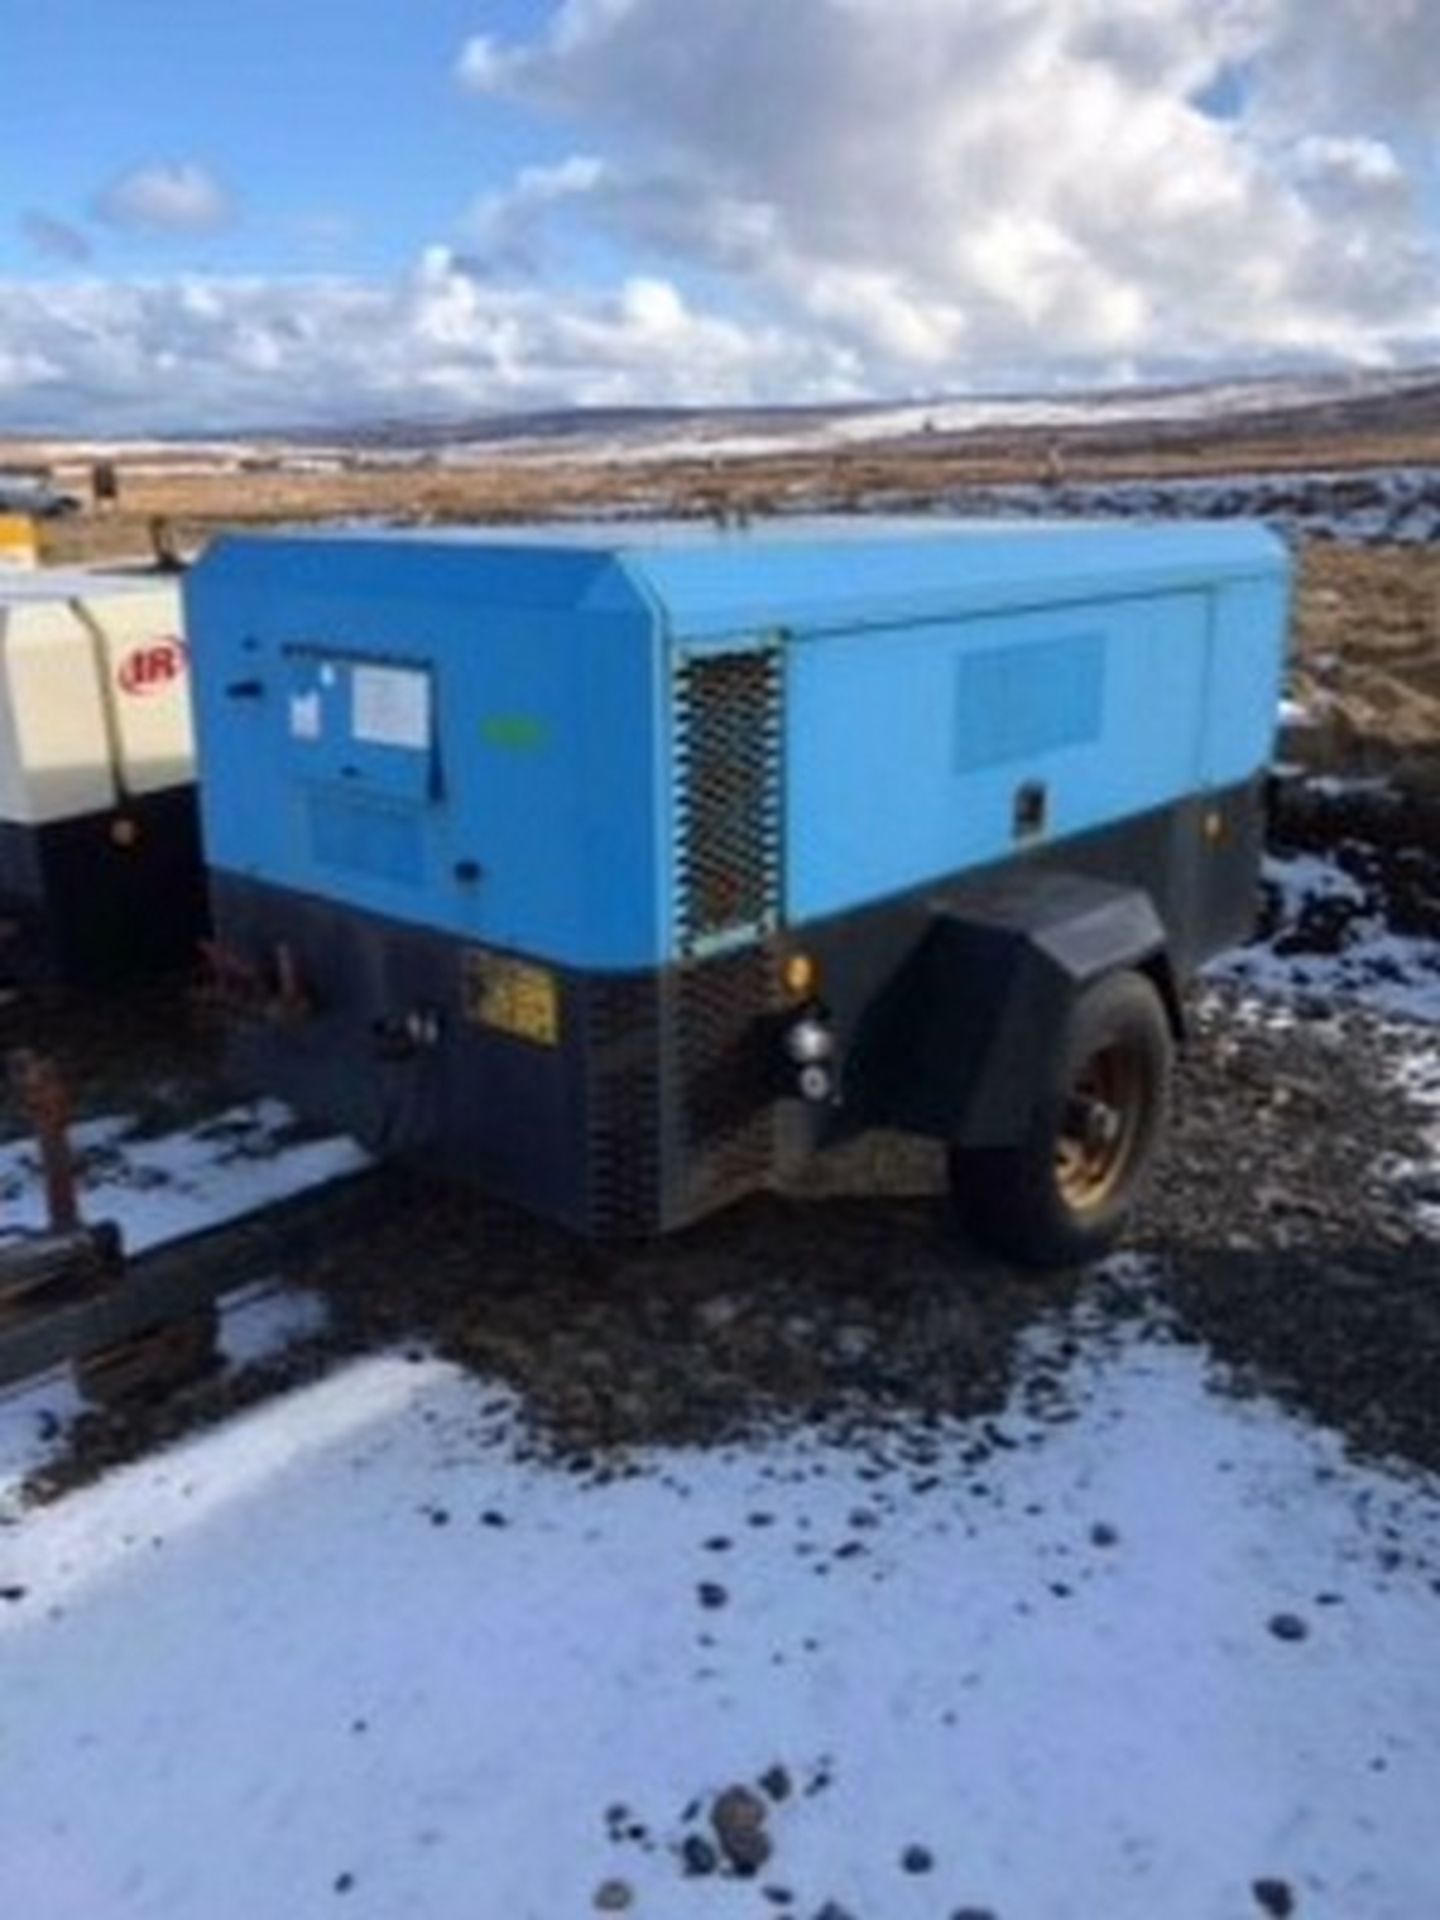 INGERSOLL-RAND P380 (BLUE). 6301 HRS GENERAL WEAR AND TEAR TO BODY WORK. (USED).